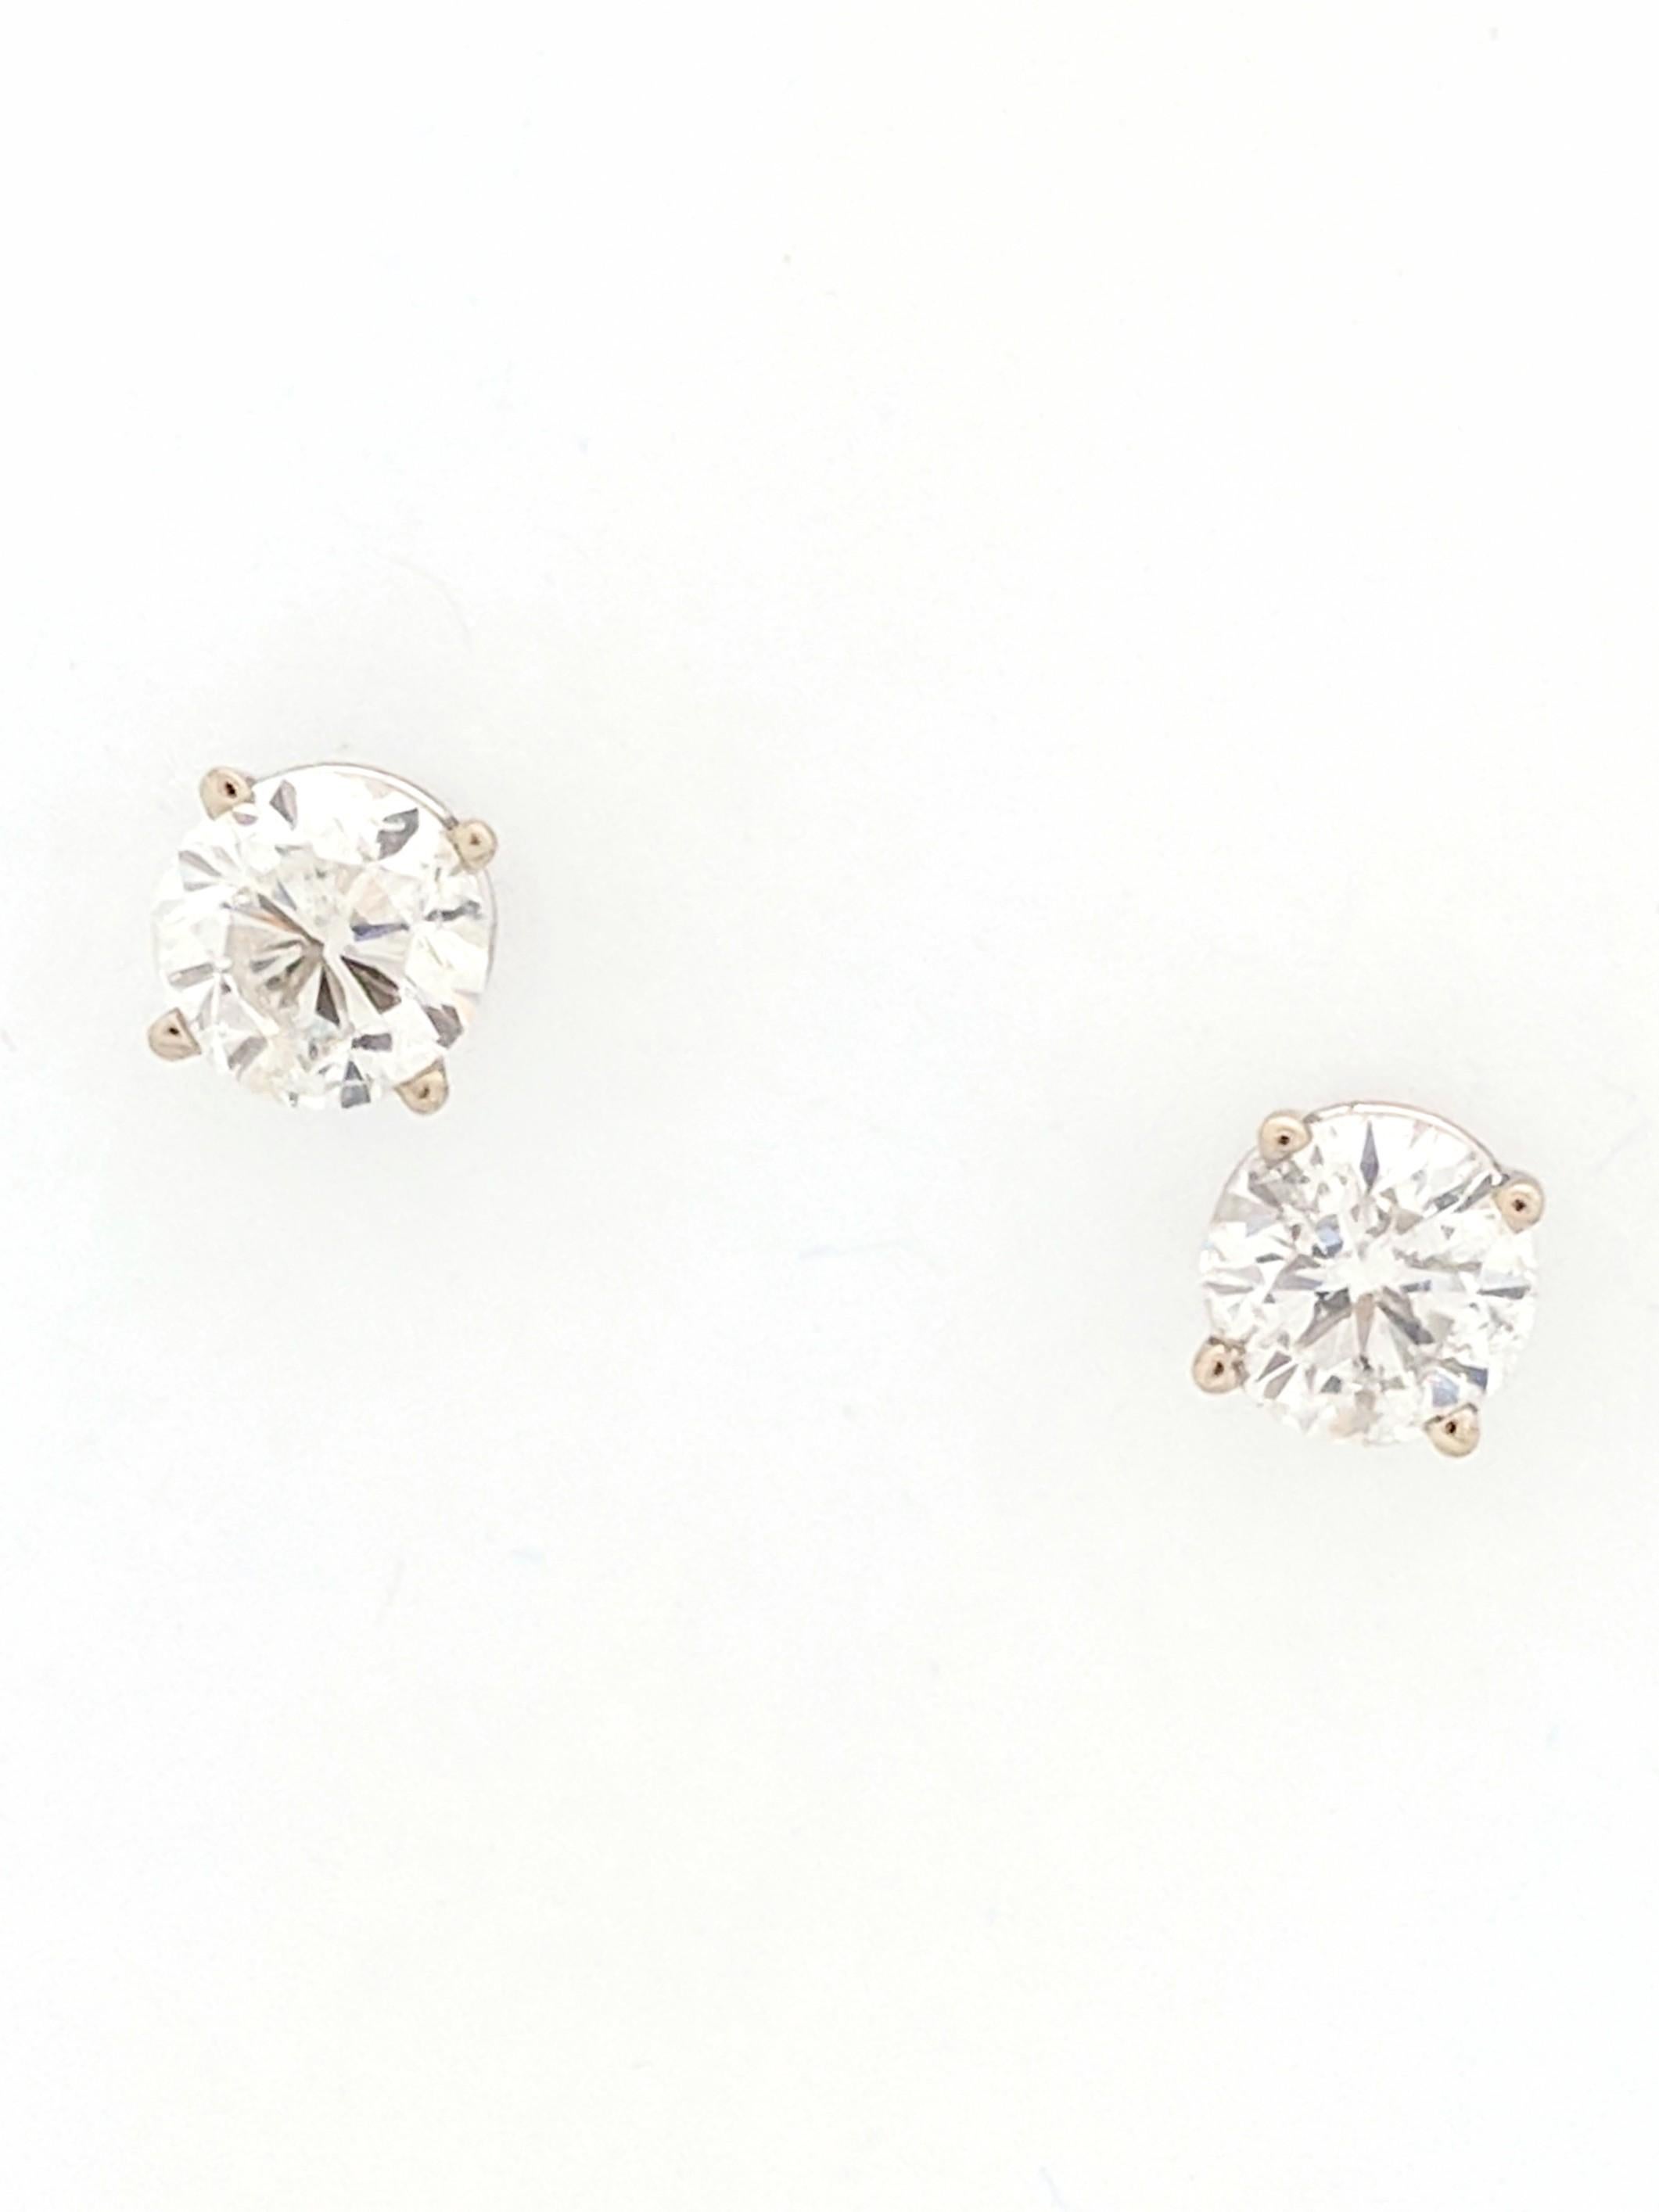 You are viewing a Beautiful Pair of Diamond Stud Earrings. These earrings are crafted from 14k white gold and weighs 1.1 grams. Each earring features approximately (1) 0.915ct natural round brilliant cut diamond which measures 6mm for an estimated